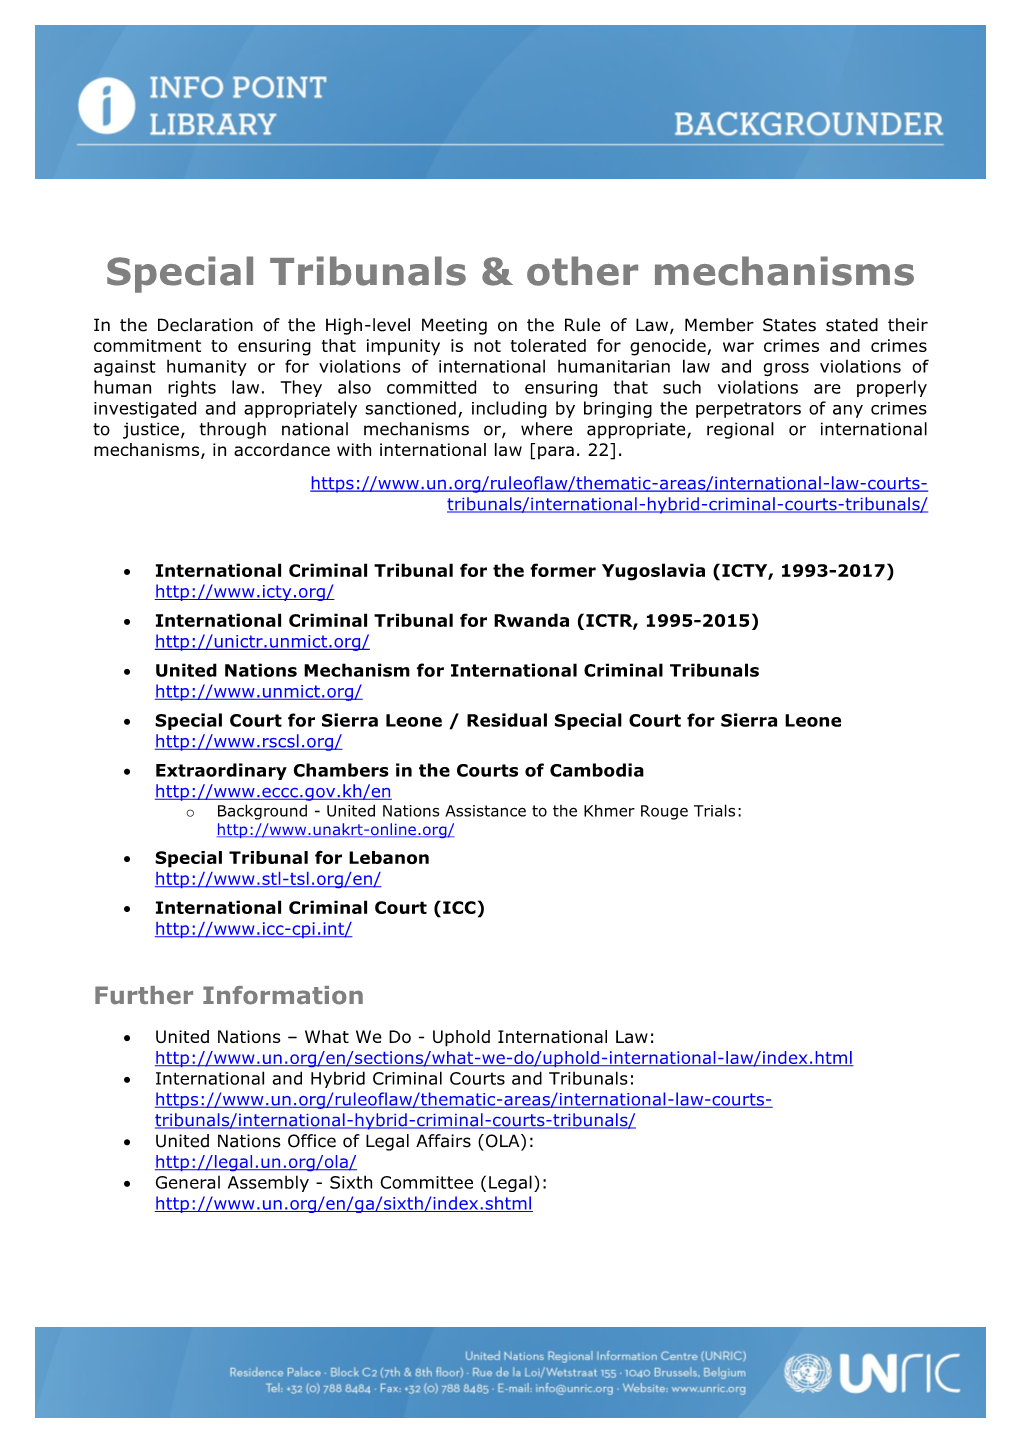 Special Tribunals & Other Mechanisms